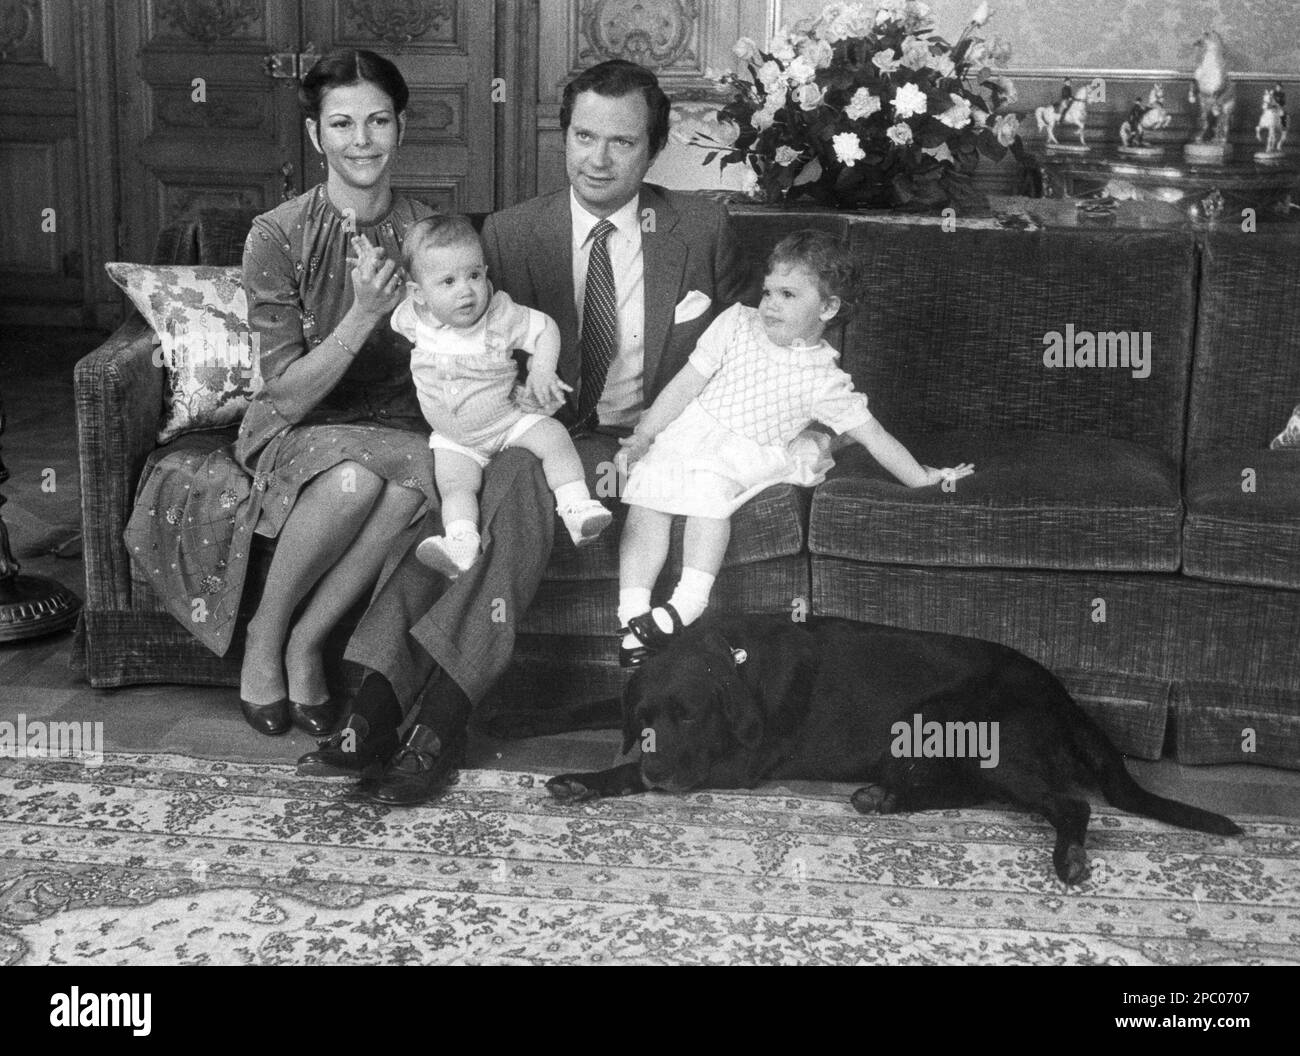 Swedish KING CARL XVI GUSTAF with wife Queen Silvia and the children Carl Philip and Princess Victoria in a sofa at Royal Palace in Stockholm Stock Photo